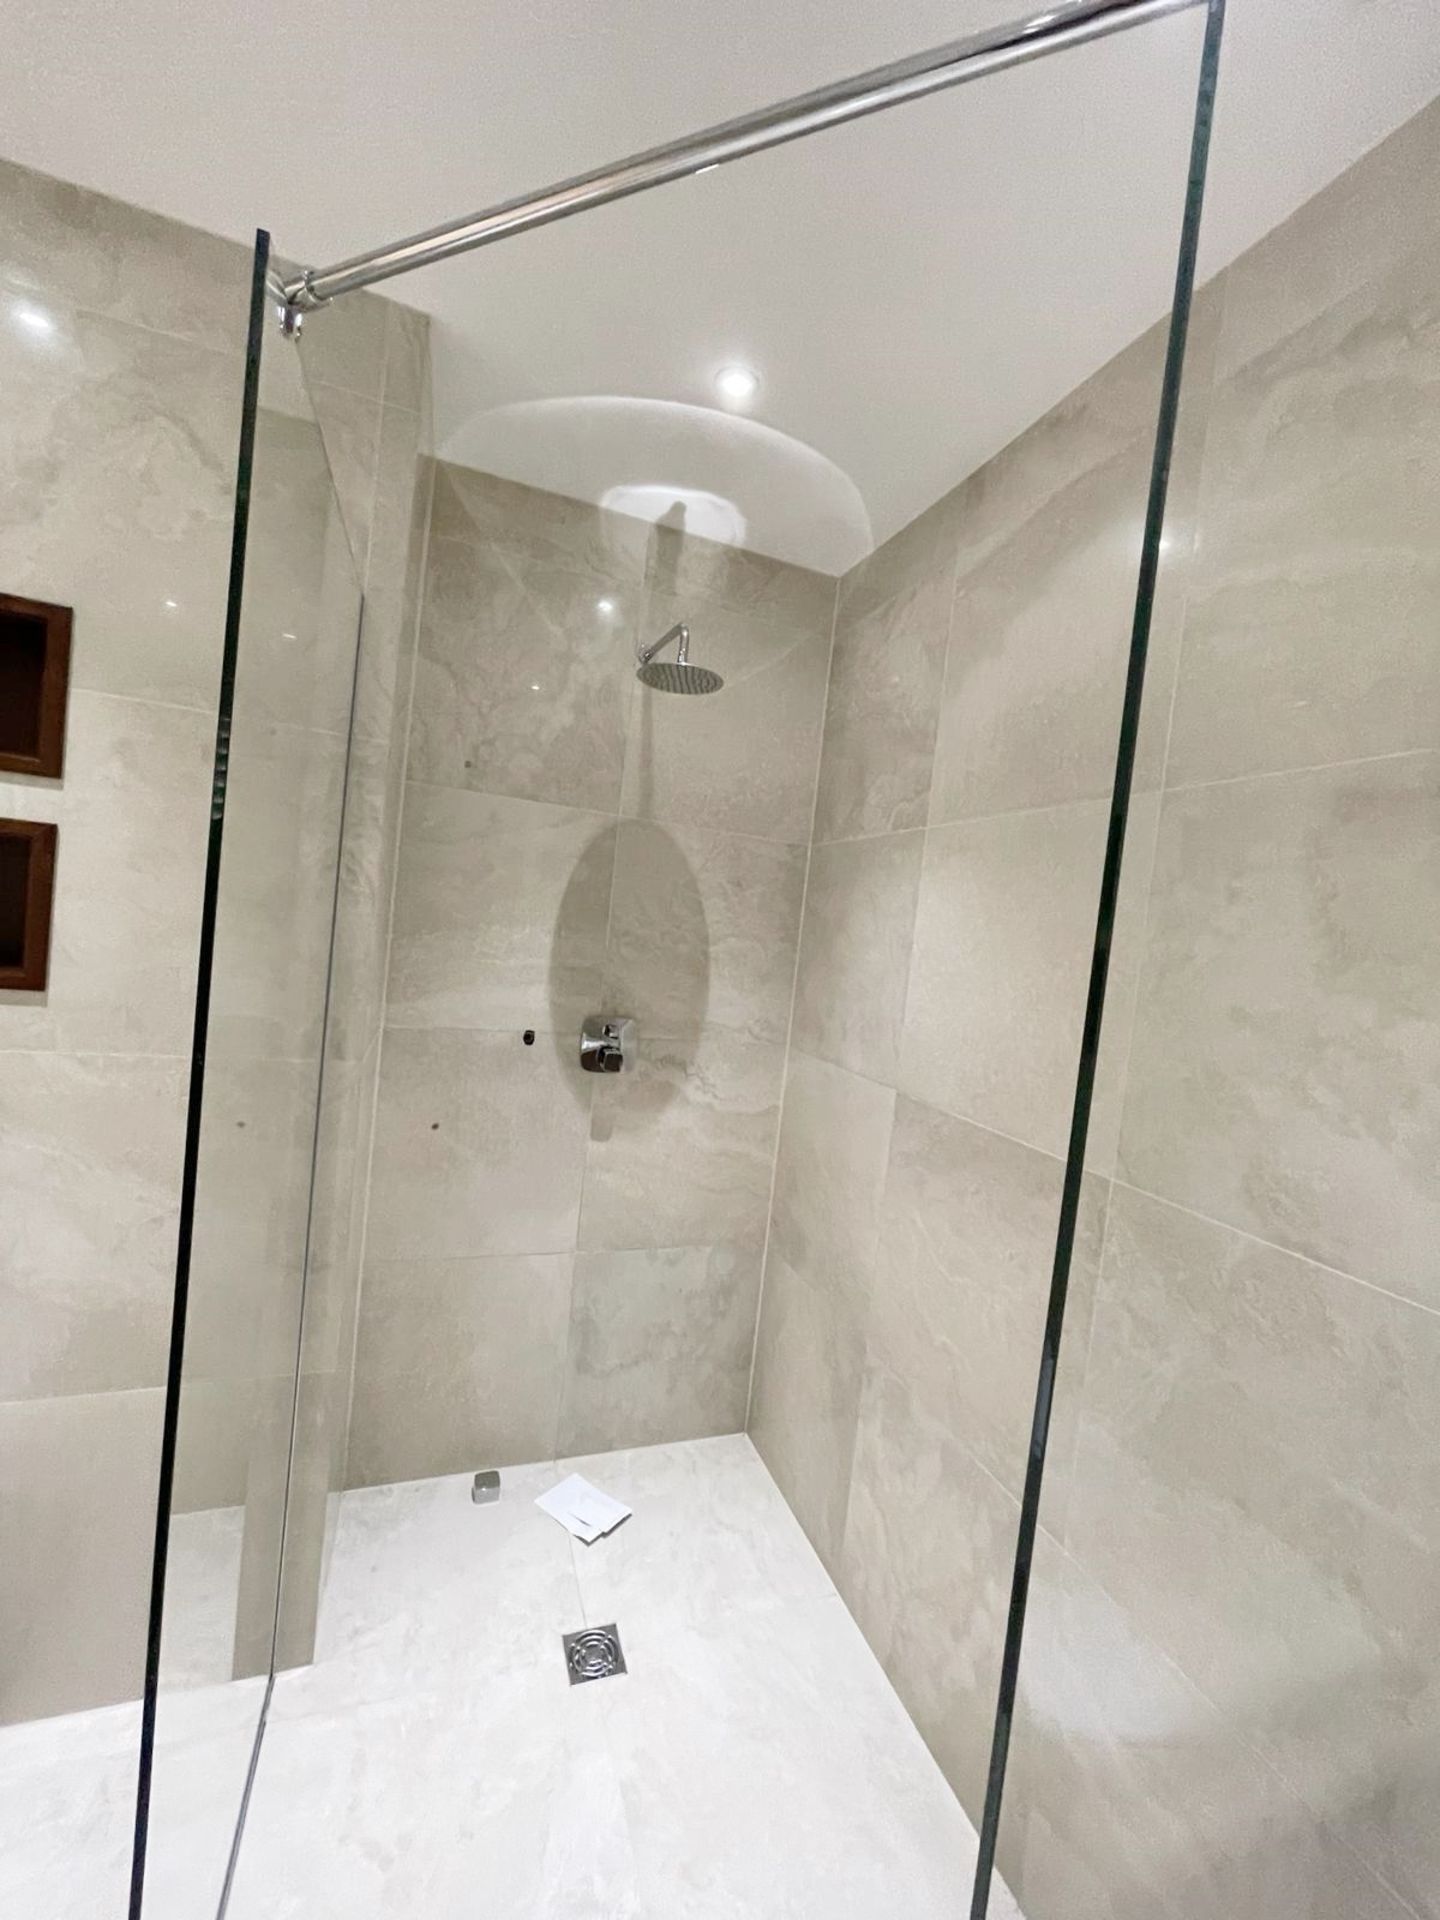 1 x Premium Shower and Enclosure + hansgrohe Controls and Thermostat - Ref: PAN251 / Bed2bth - CL896 - Image 9 of 15